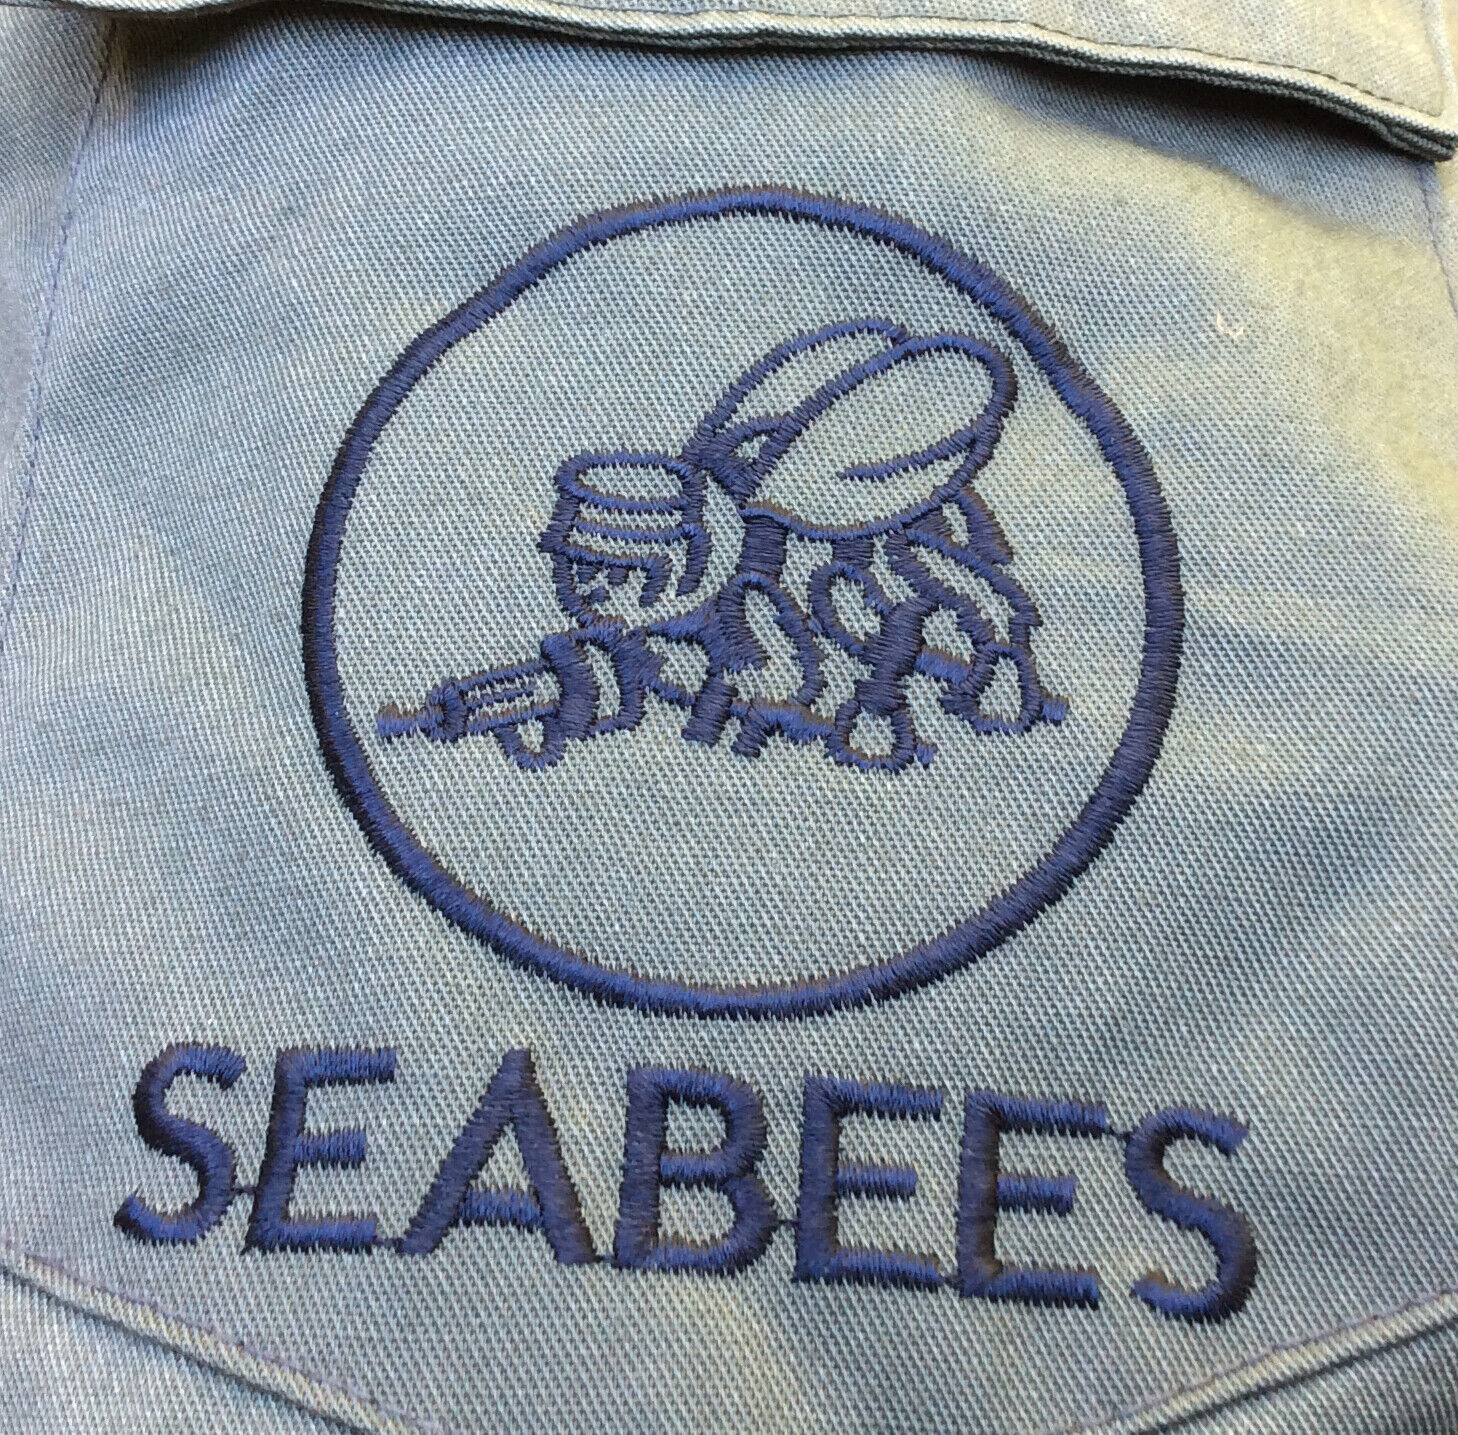 US Navy Seabees Embroidered  15-1/2x33 OG 507 Utility Top or Shirt